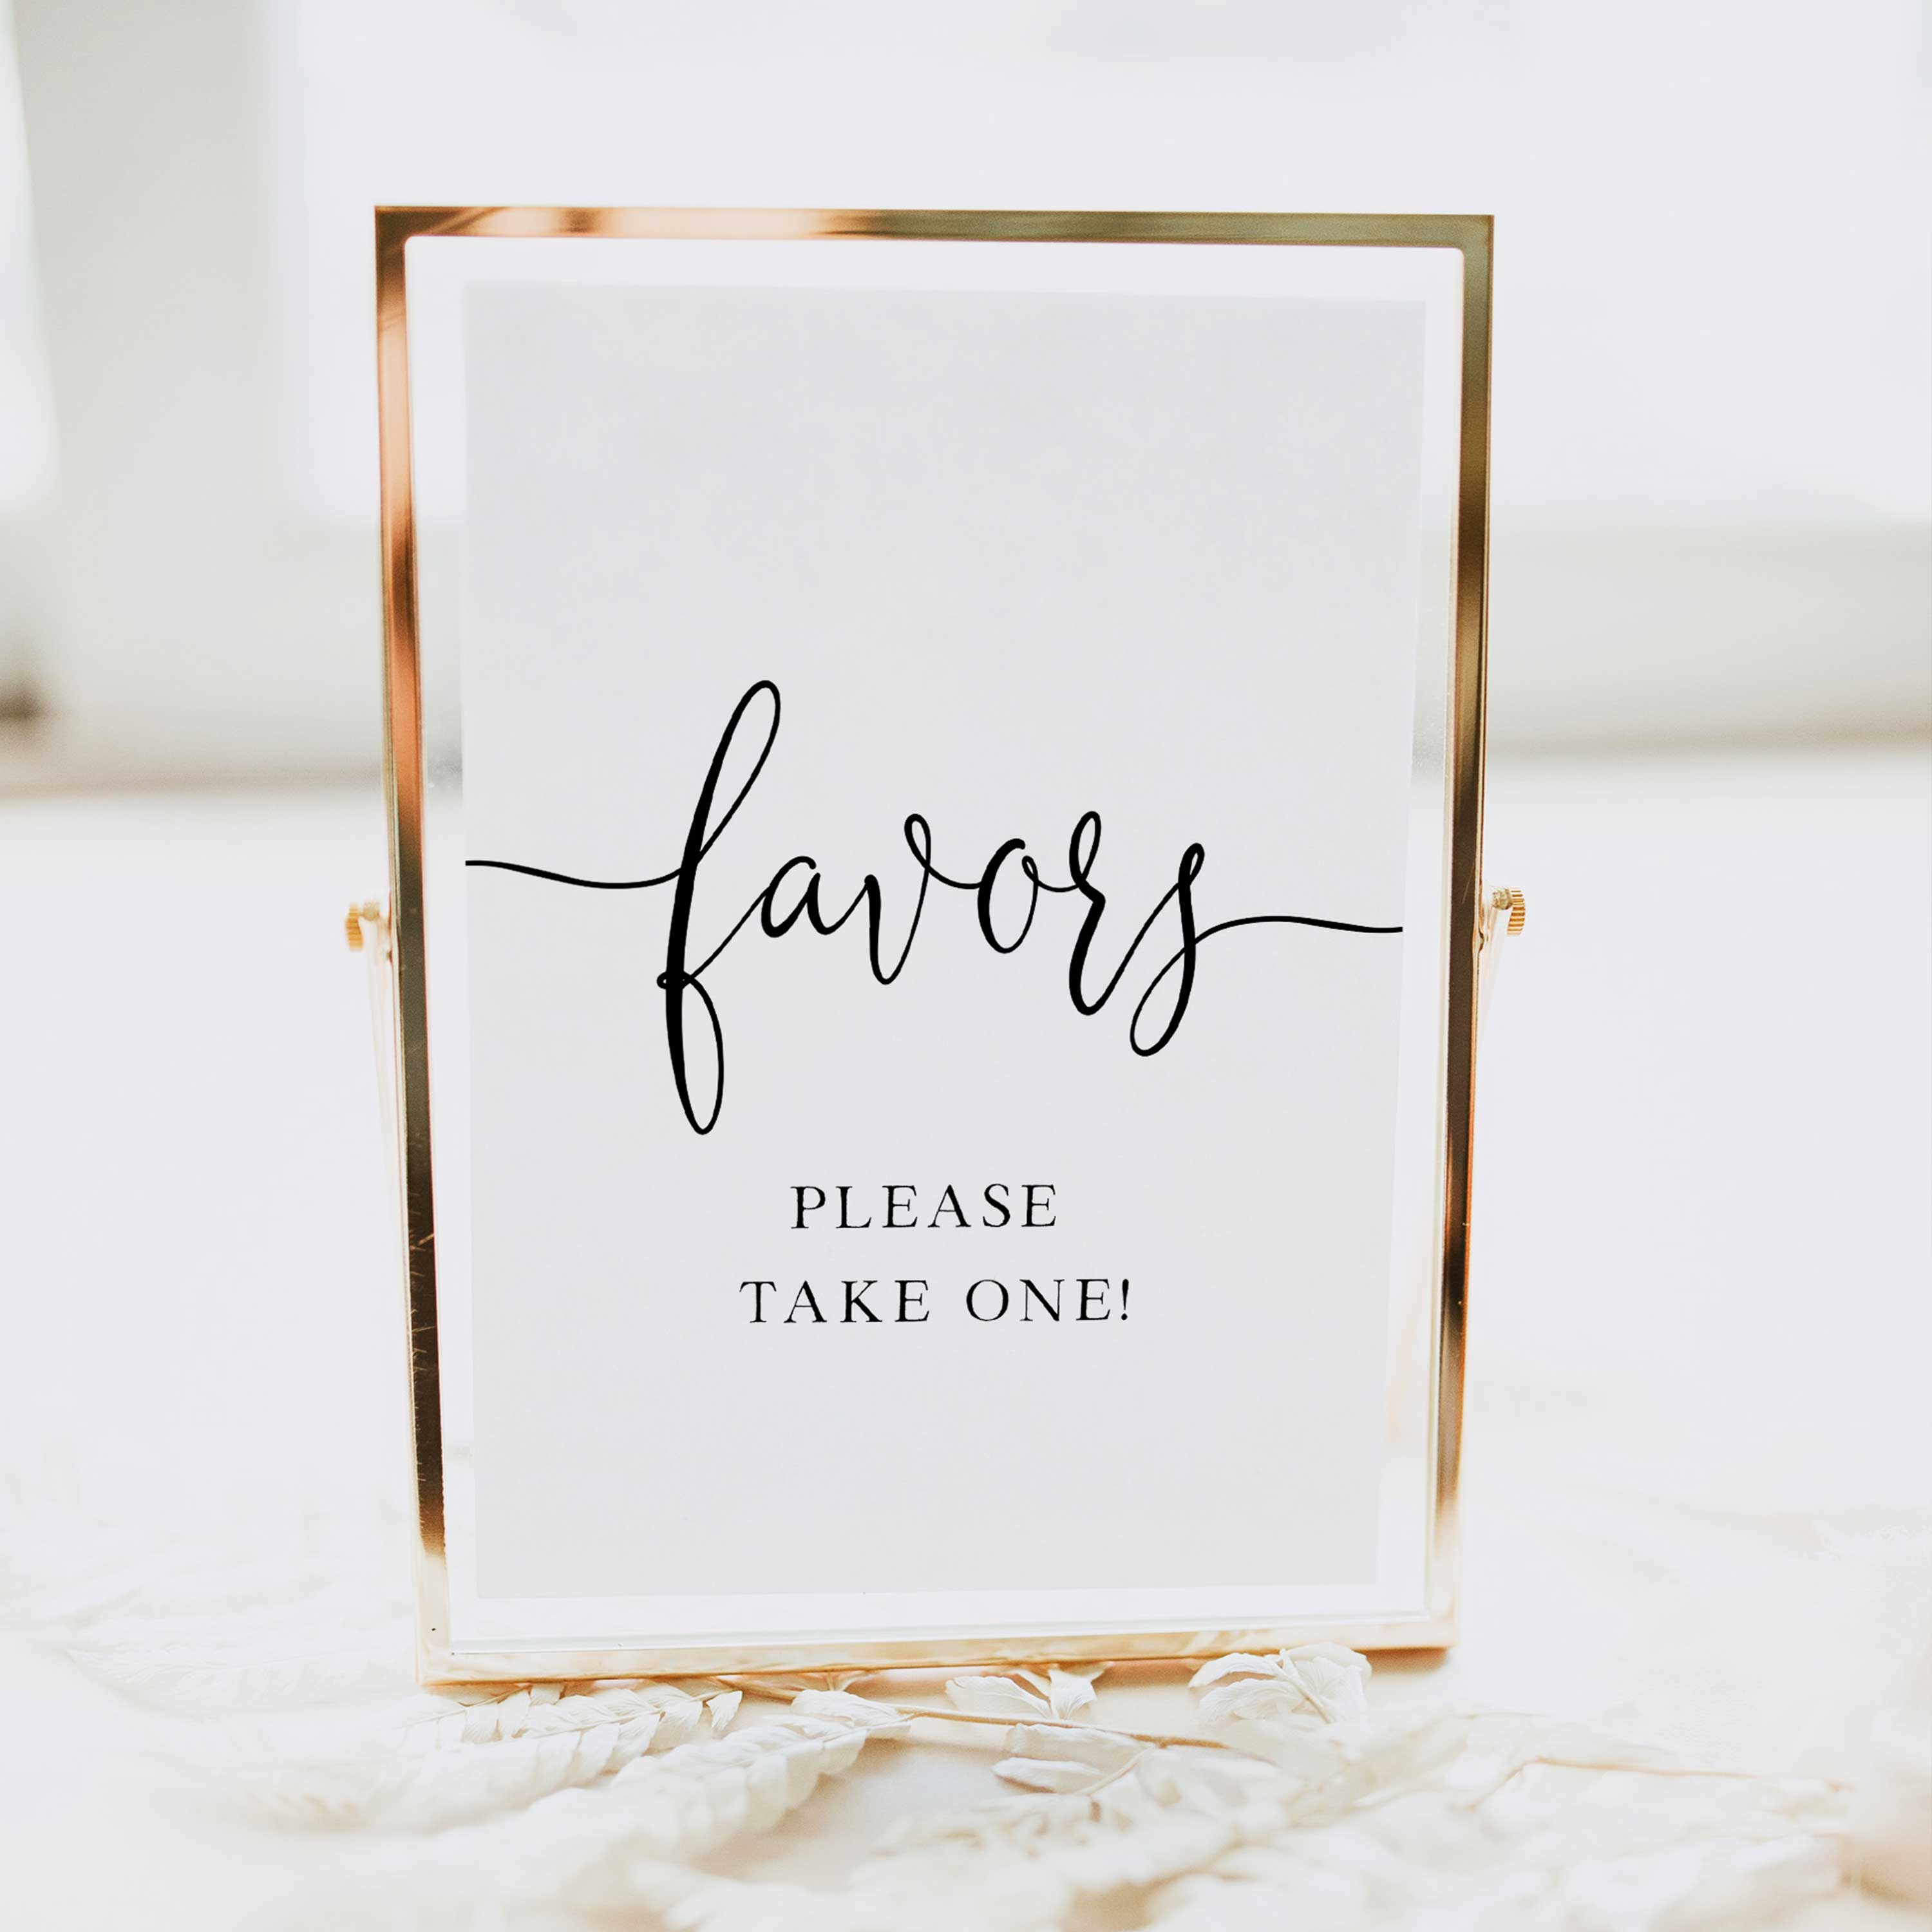 Minimalist bridal shower signs, favors baby sign, printable bridal signs, printable bridal decor, minimalist bridal decor, bridal decor, bridal table signs